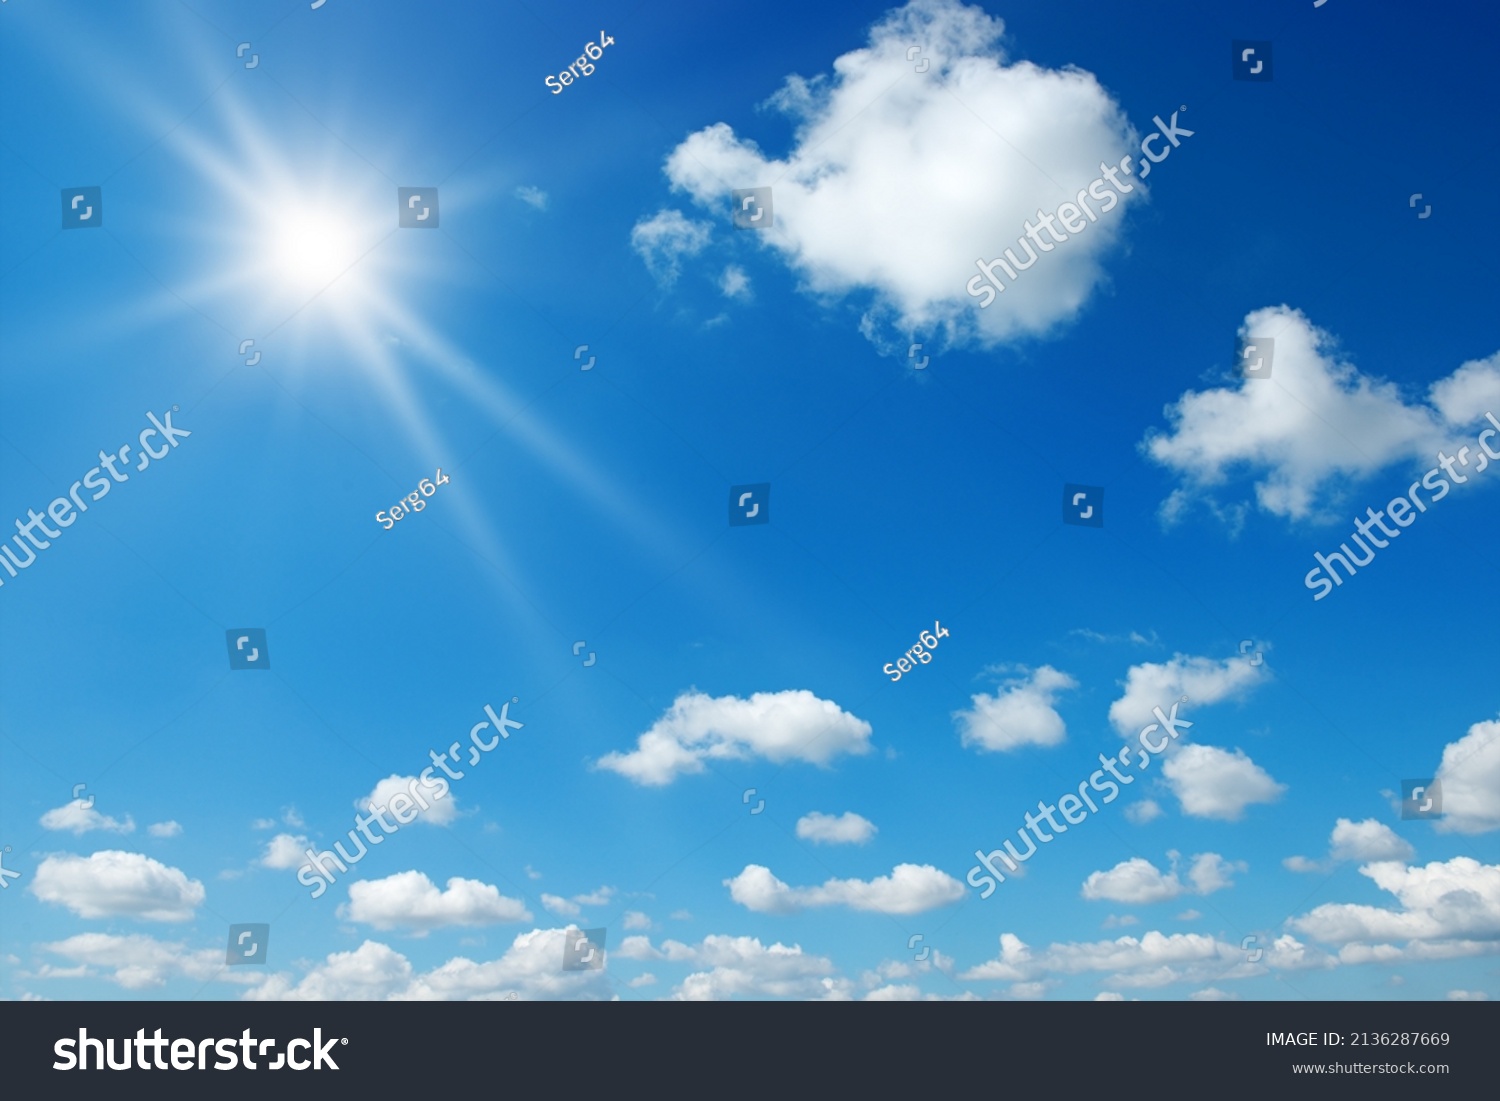 Bright sun on beautiful blue sky with white fluffy clouds. #2136287669